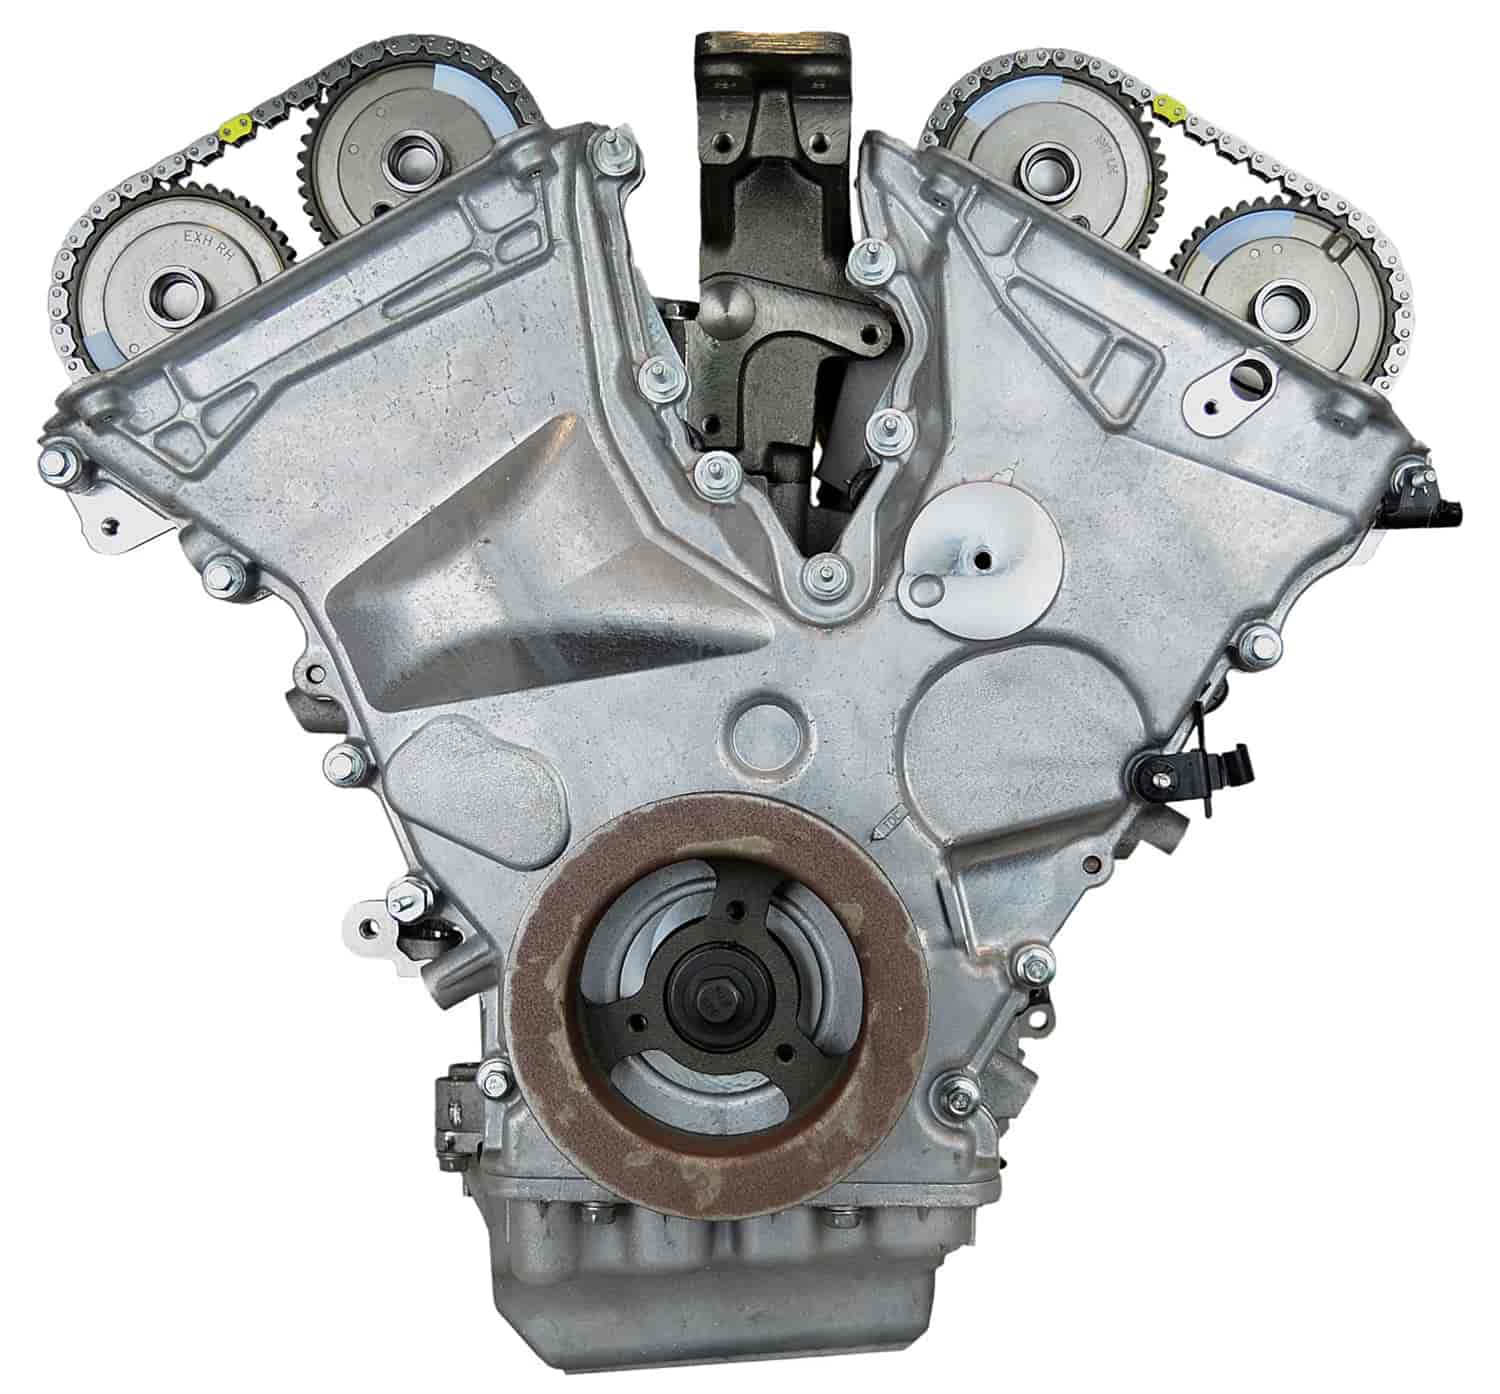 Remanufactured Crate Engine for 2004-2006 Mazda MPV with 3.0L V6